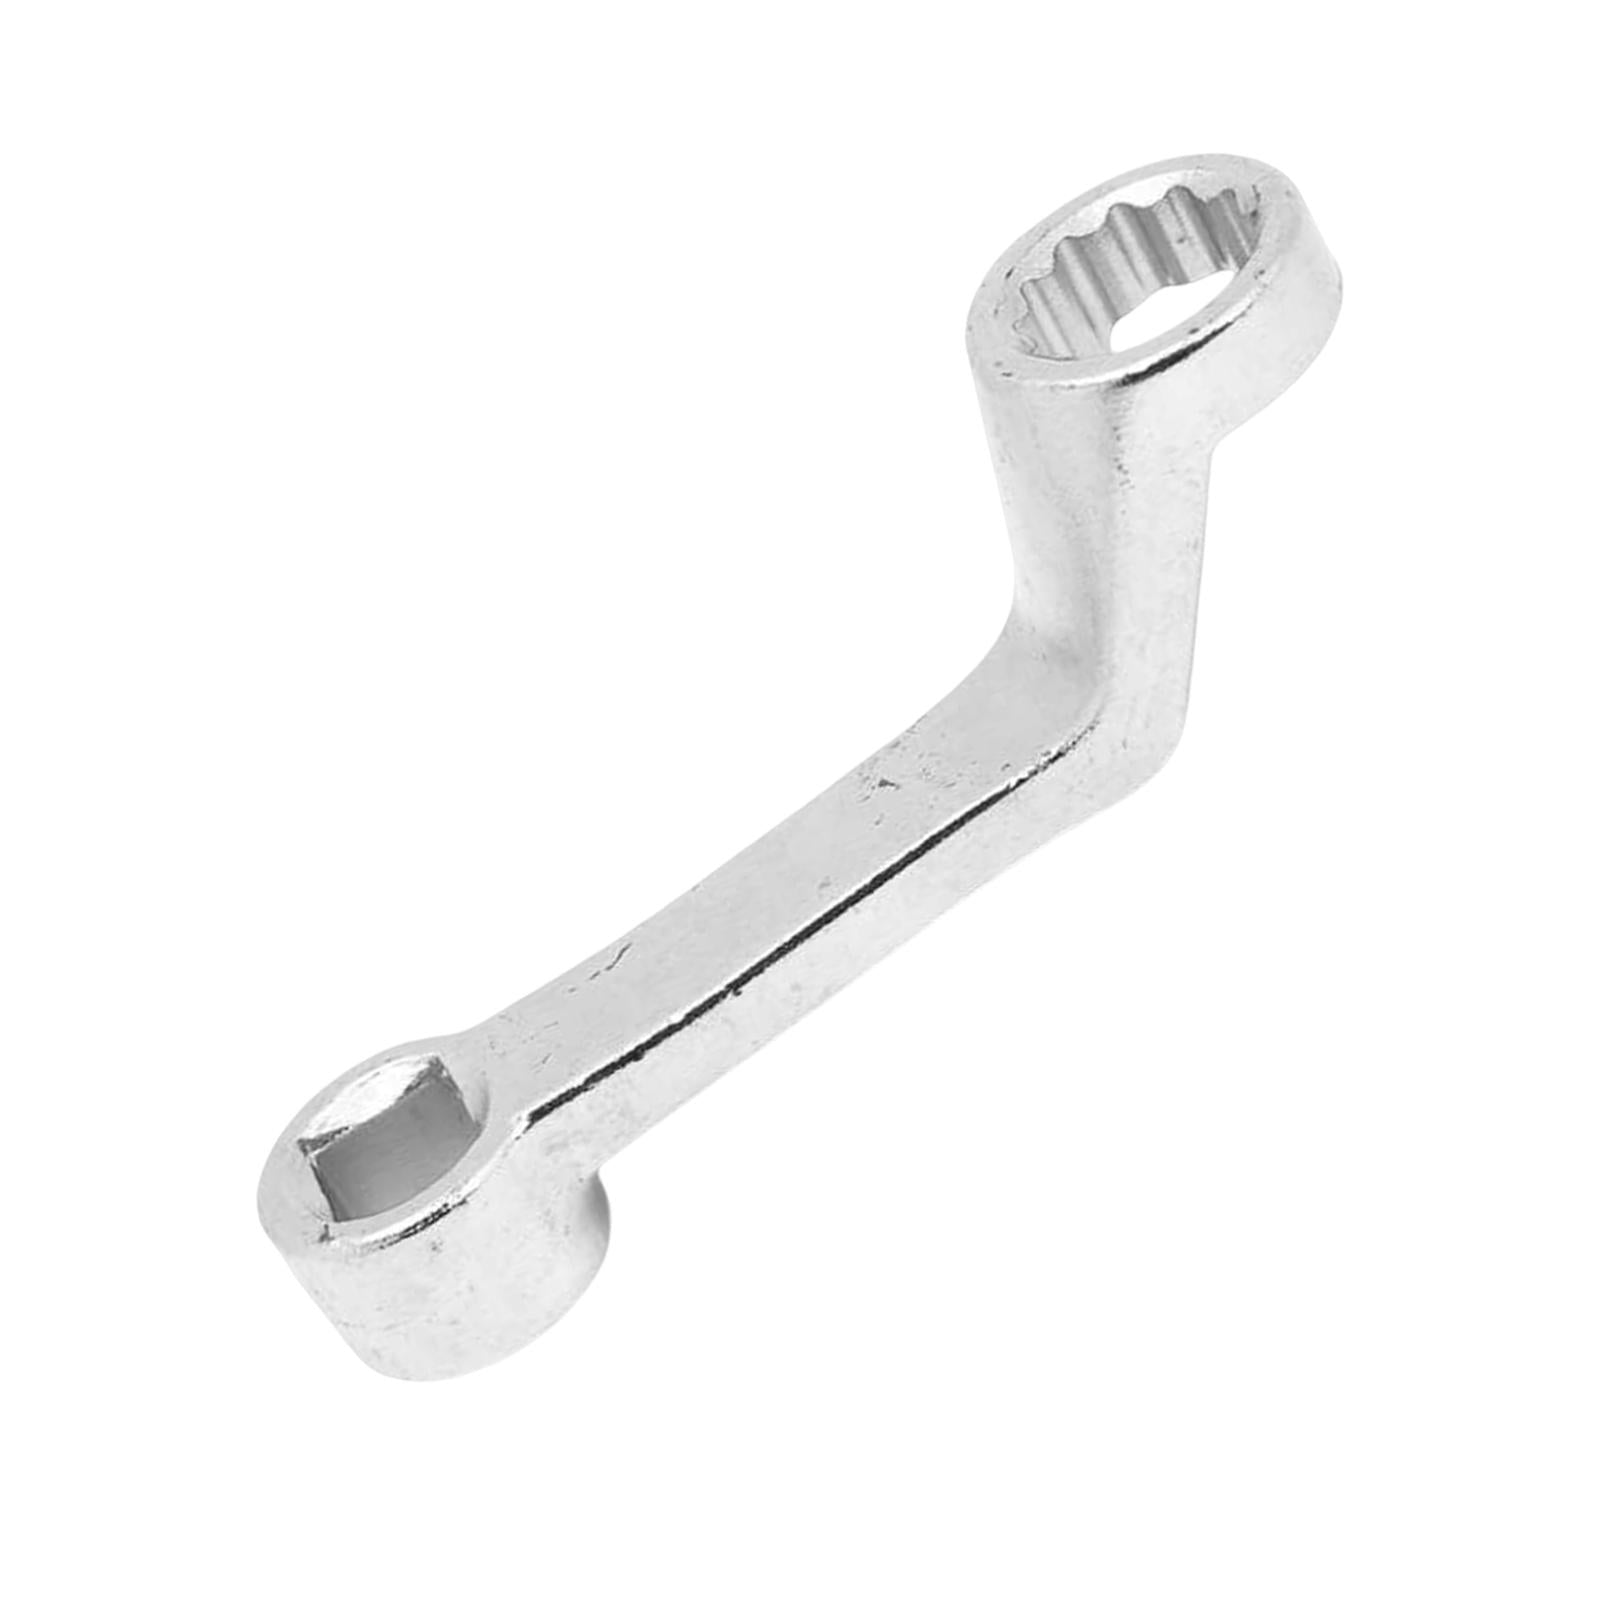 18mm Camber Adjusting Wrench T10179 for Car Repair Portable Durable Steel